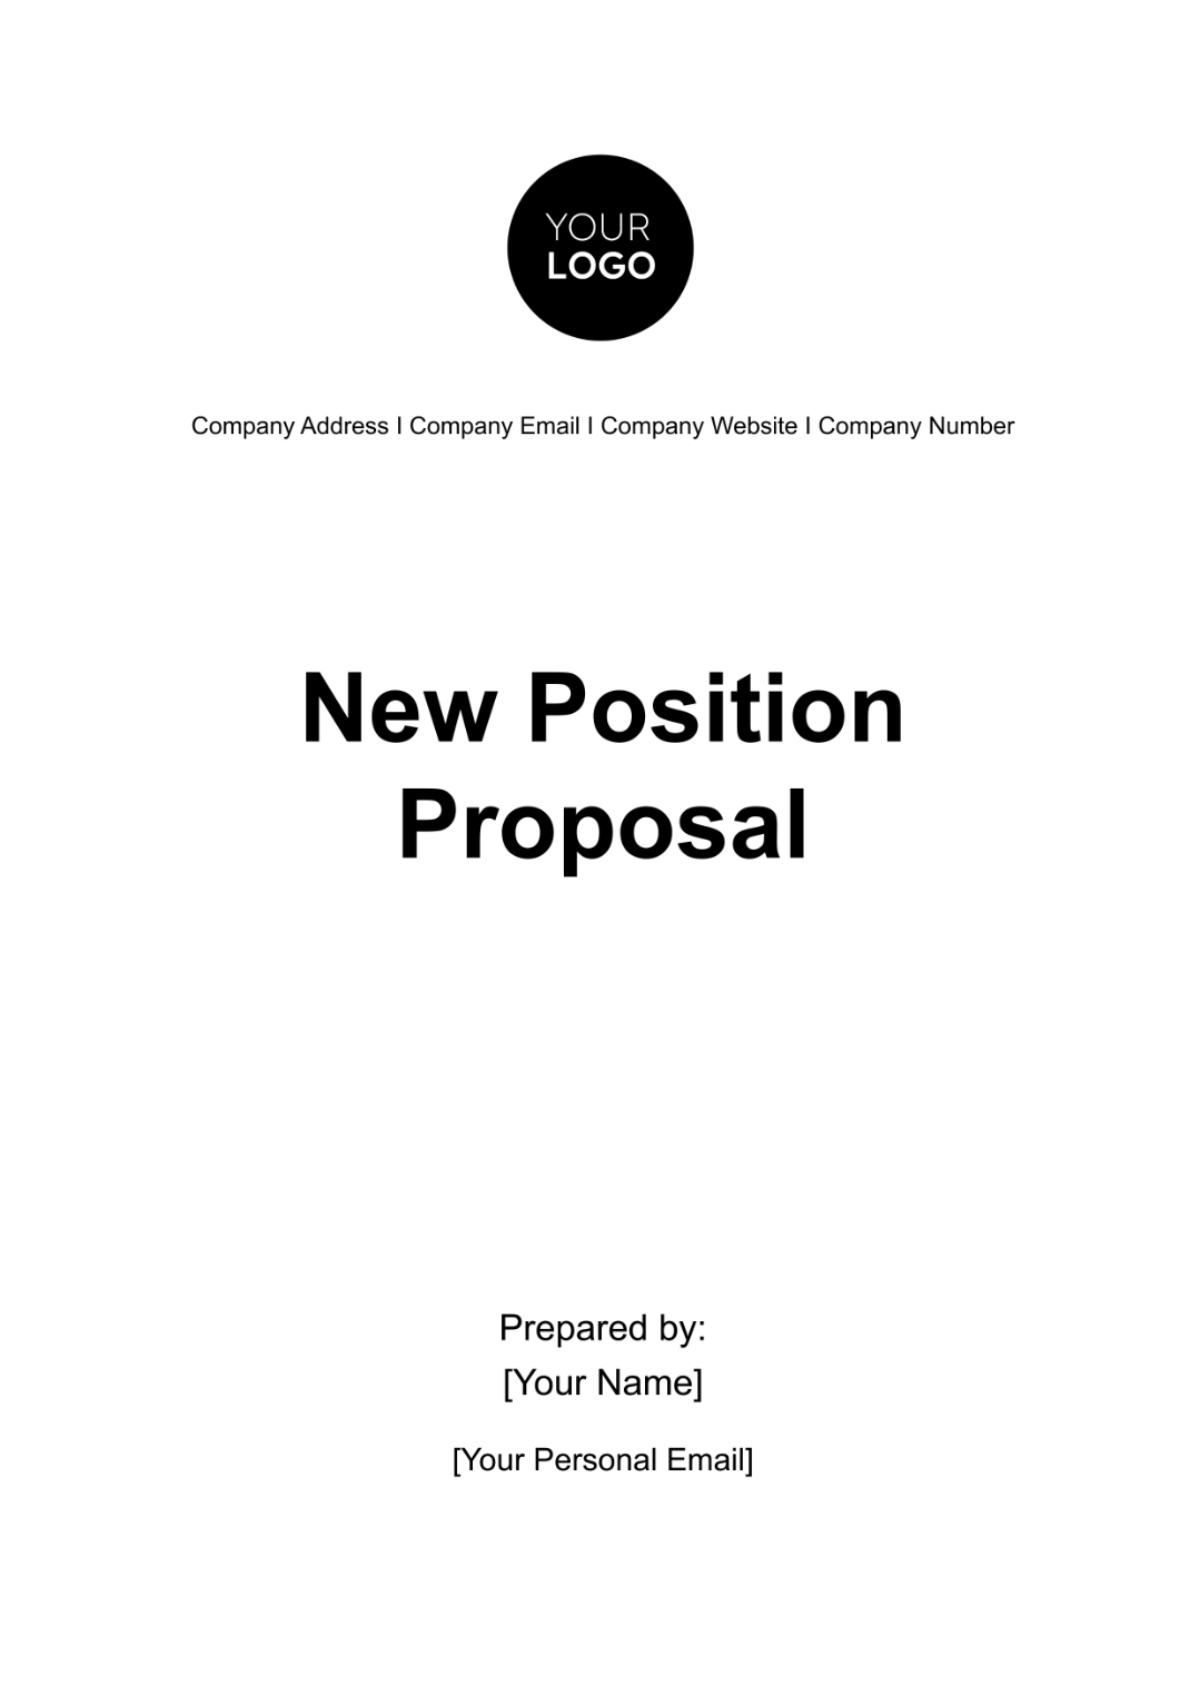 New Position Proposal HR Template